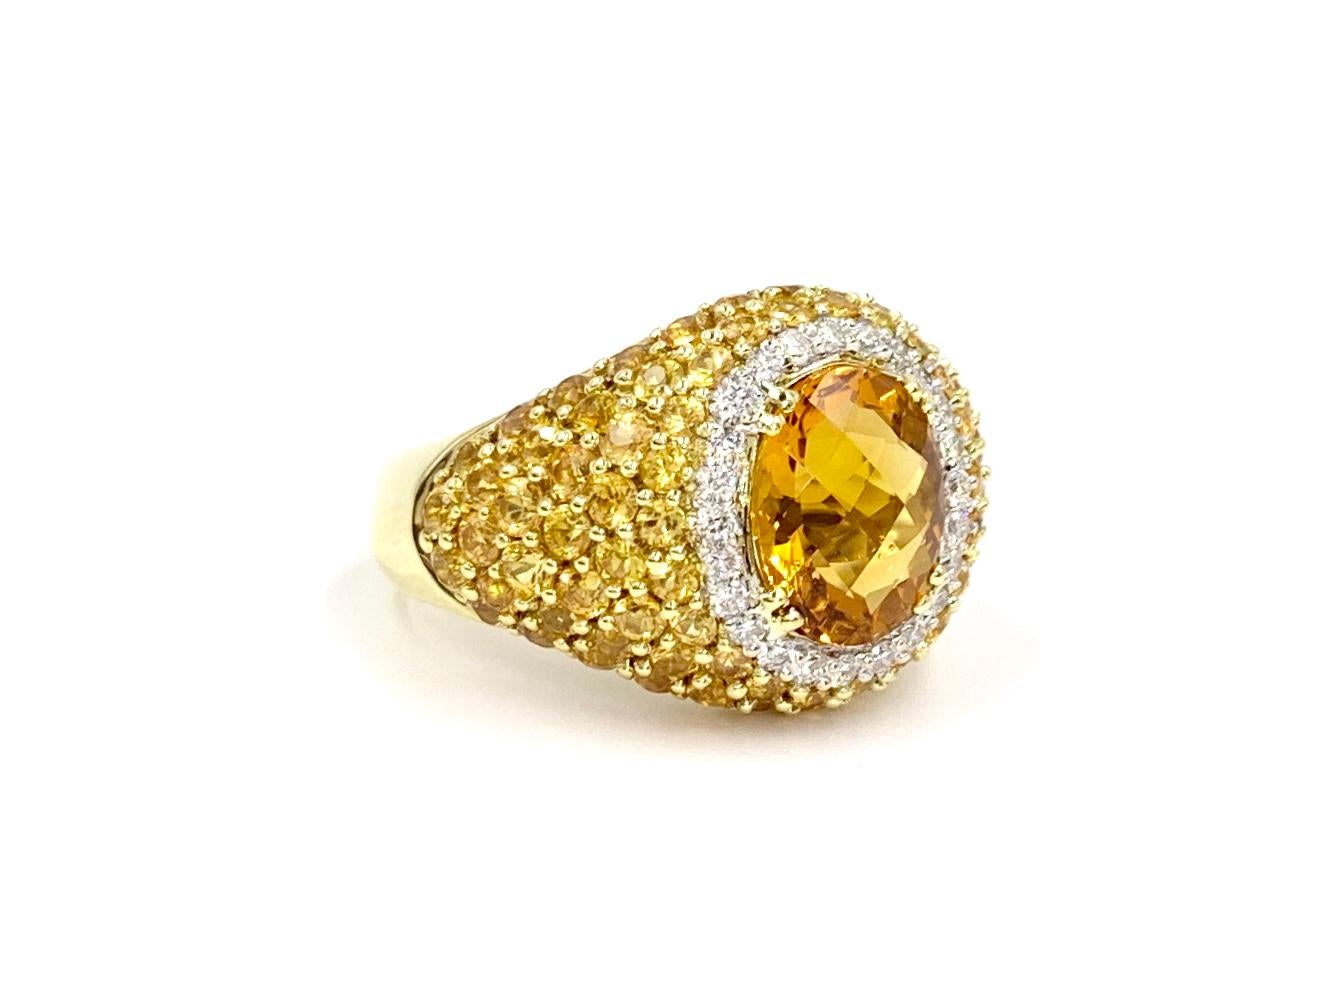 Fashionable 18 karat yellow gold wide ring featuring a 2.40 carat oval checkerboard faceted citrine surrounded by .28 carats of bright white diamonds and 2.75 carats of vivid yellow sapphires. Diamonds are approximately F color, VS2 clarity. Yellow